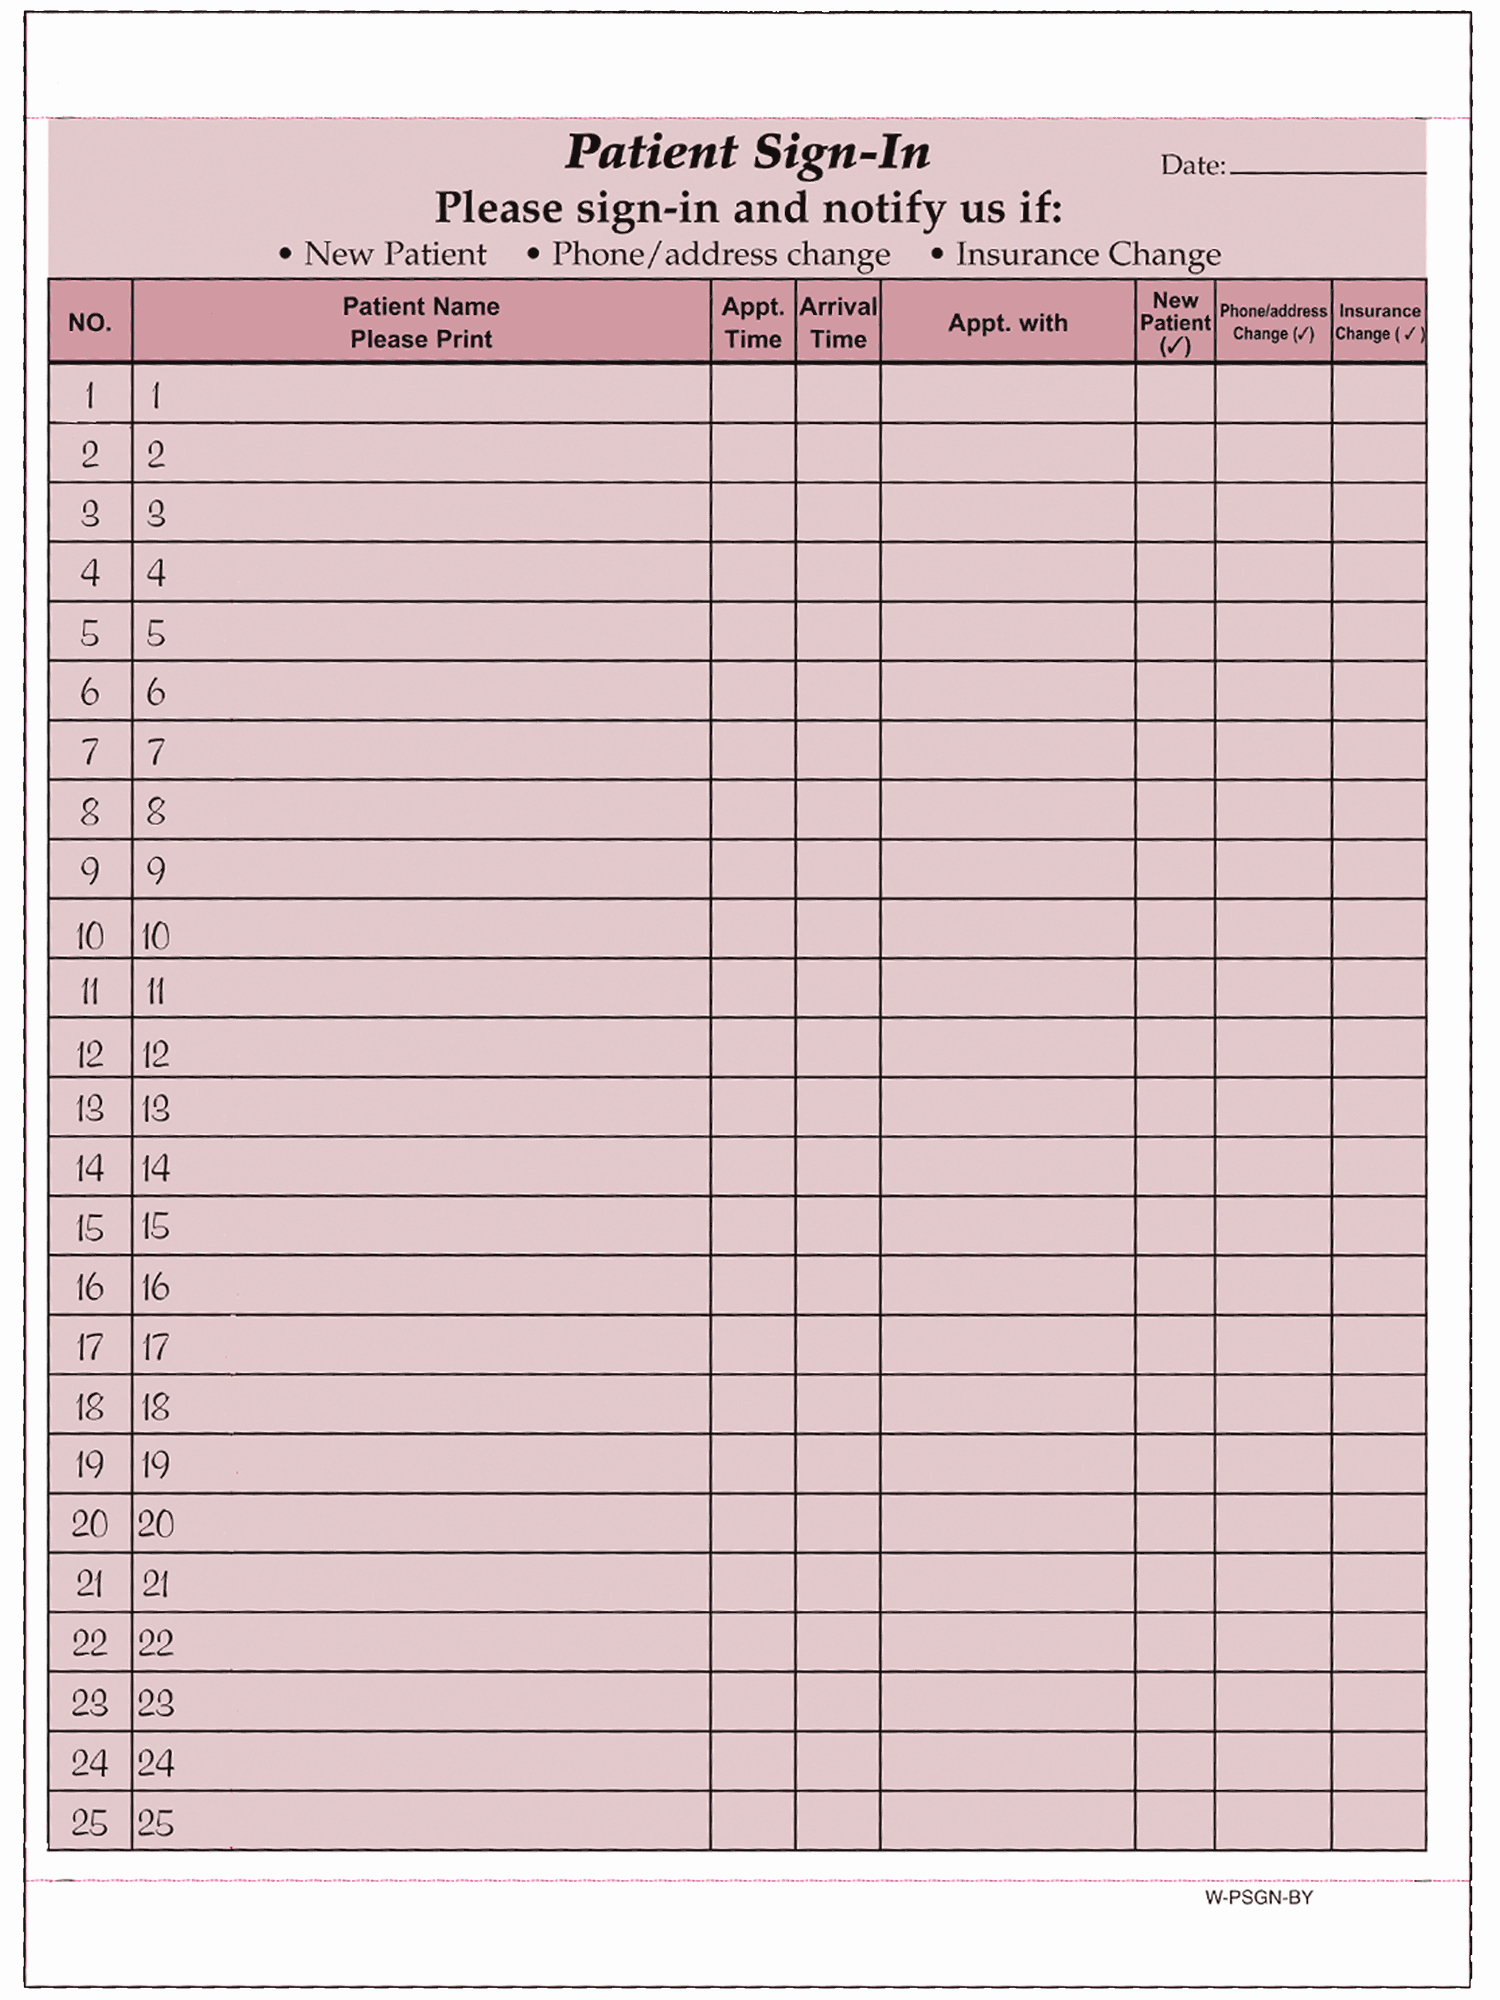 Patient Information Sheet Template Lovely Hipaa Patient Sign In Sheets